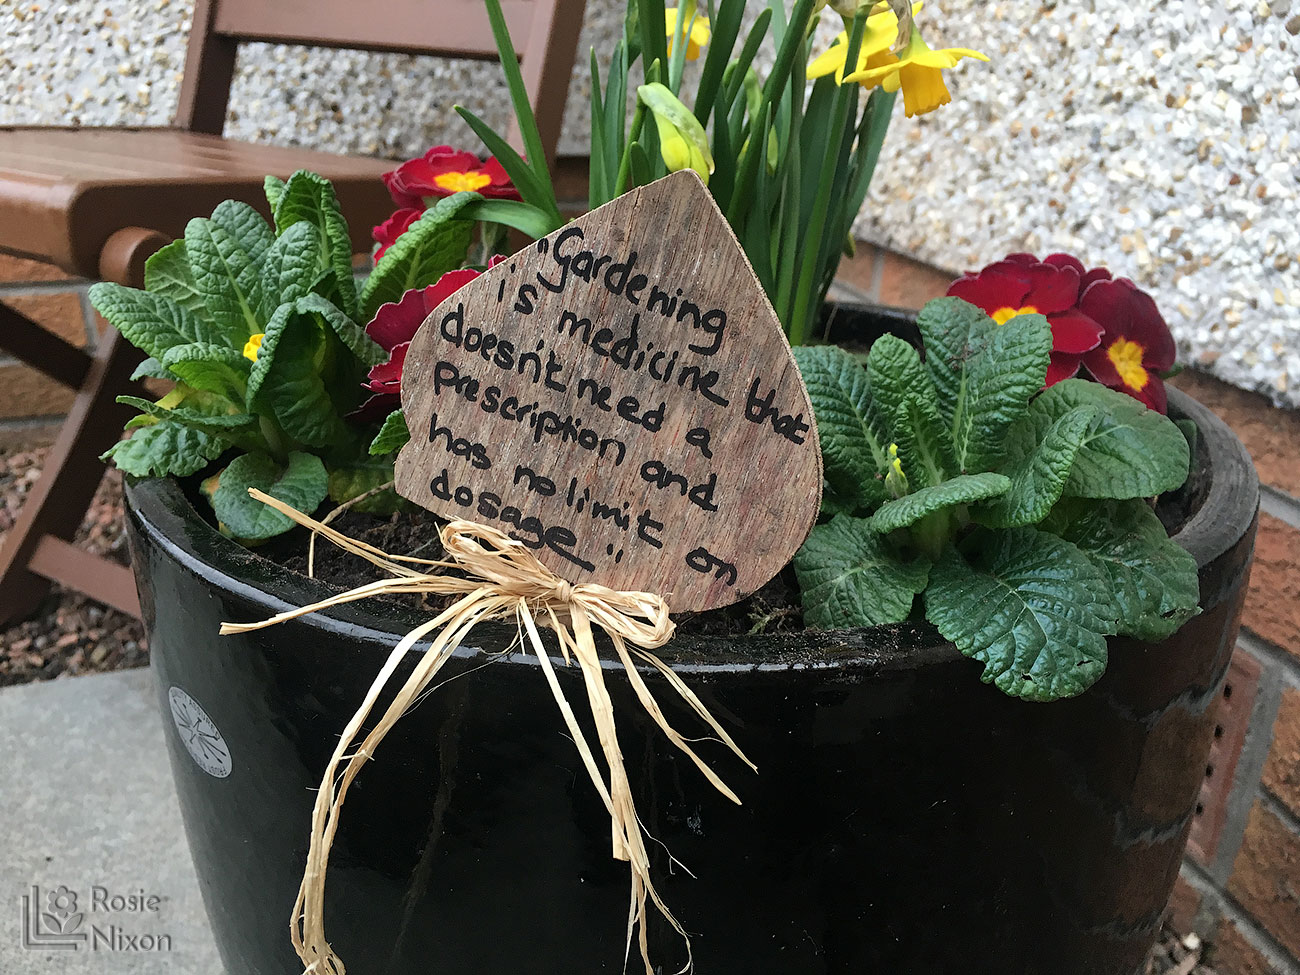 Planted container quote for Beechgrove garden